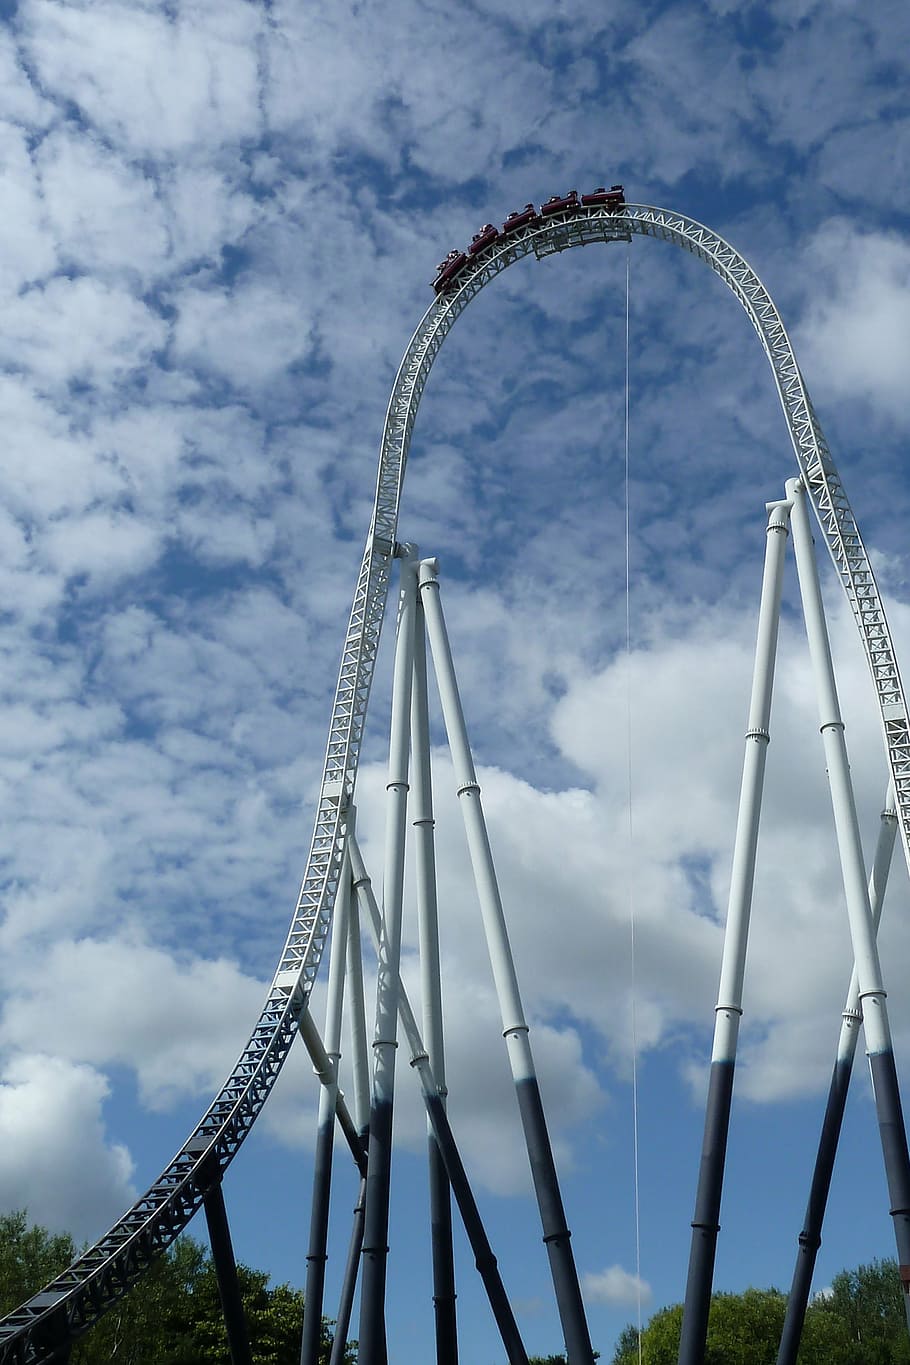 theme park, ride, adrenaline, fun, height, high, fast, thorpe park, saw, rollercoaster